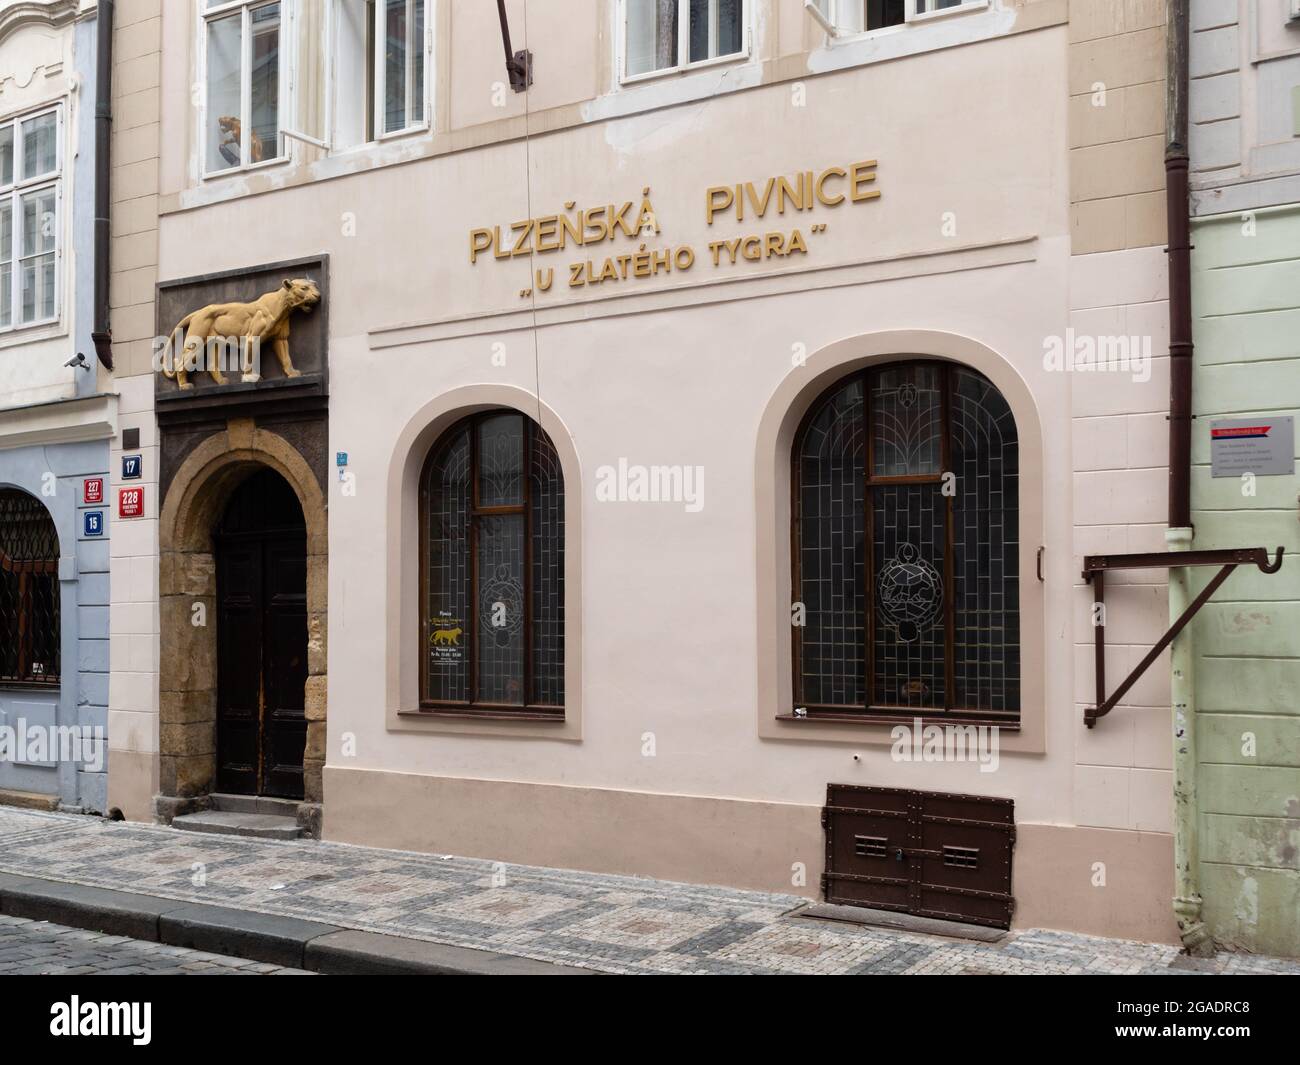 Prague, Czech Republic - July 3 2021: Plzenska Pivnice U Zlateho Tygra, Pilsner Beer Hall and Pub At the Golden Tiger in the Old Town. Stock Photo